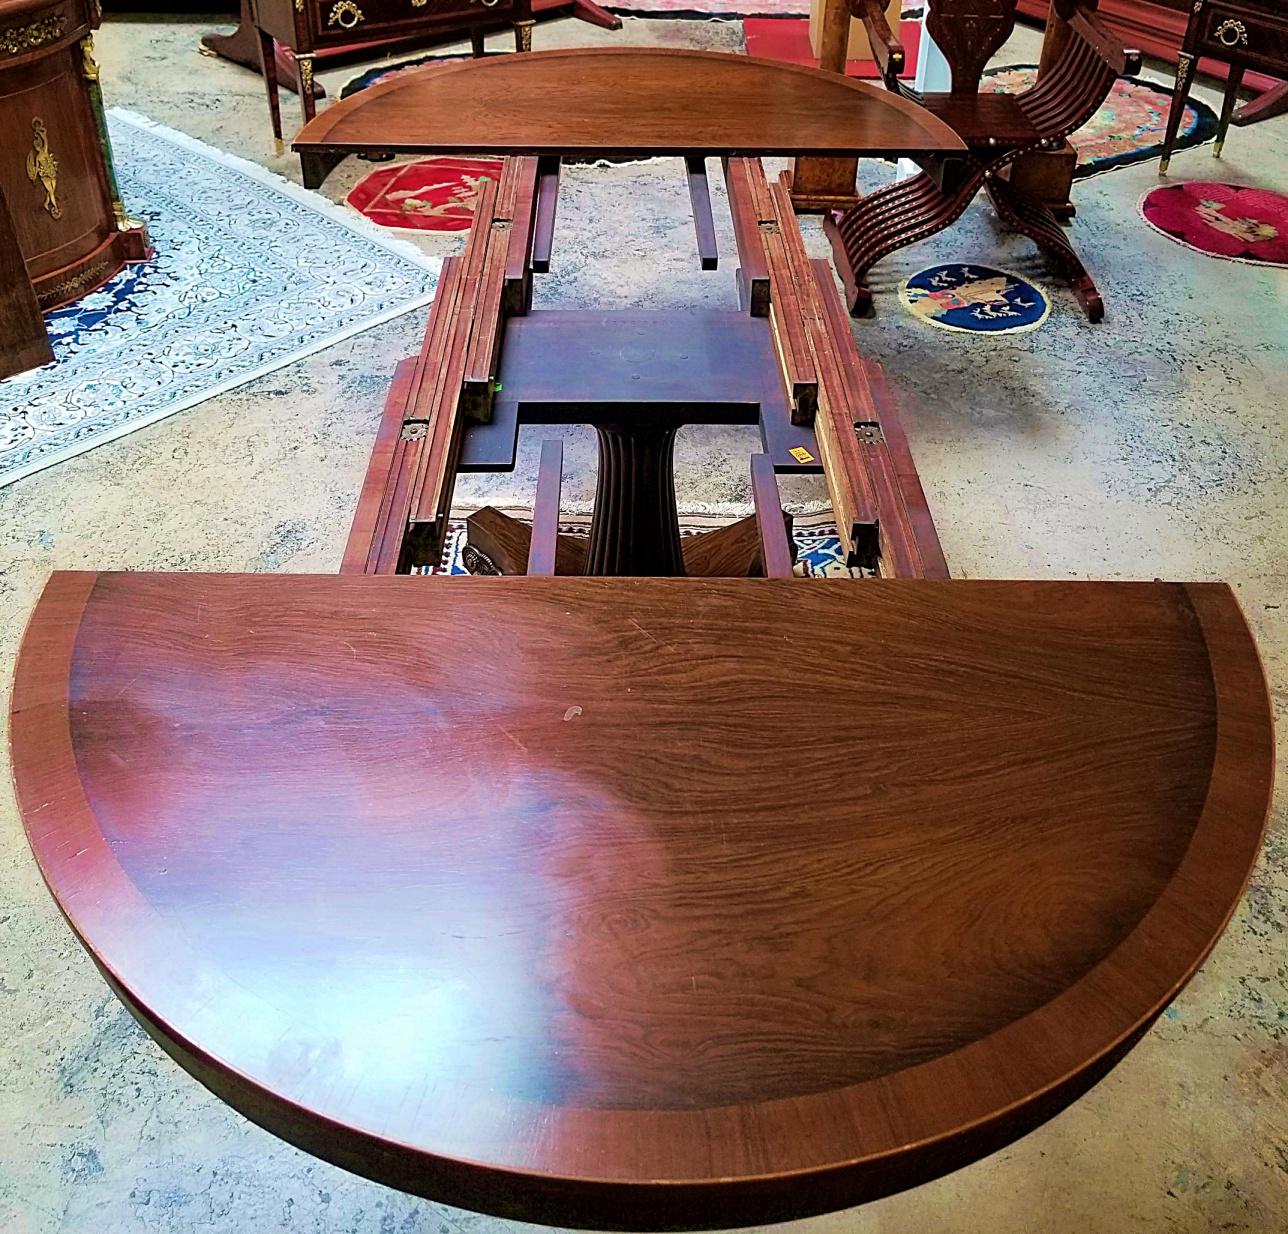 Late 19th Century American Mahogany Extendable Dining or Center Table (amerikanisch)